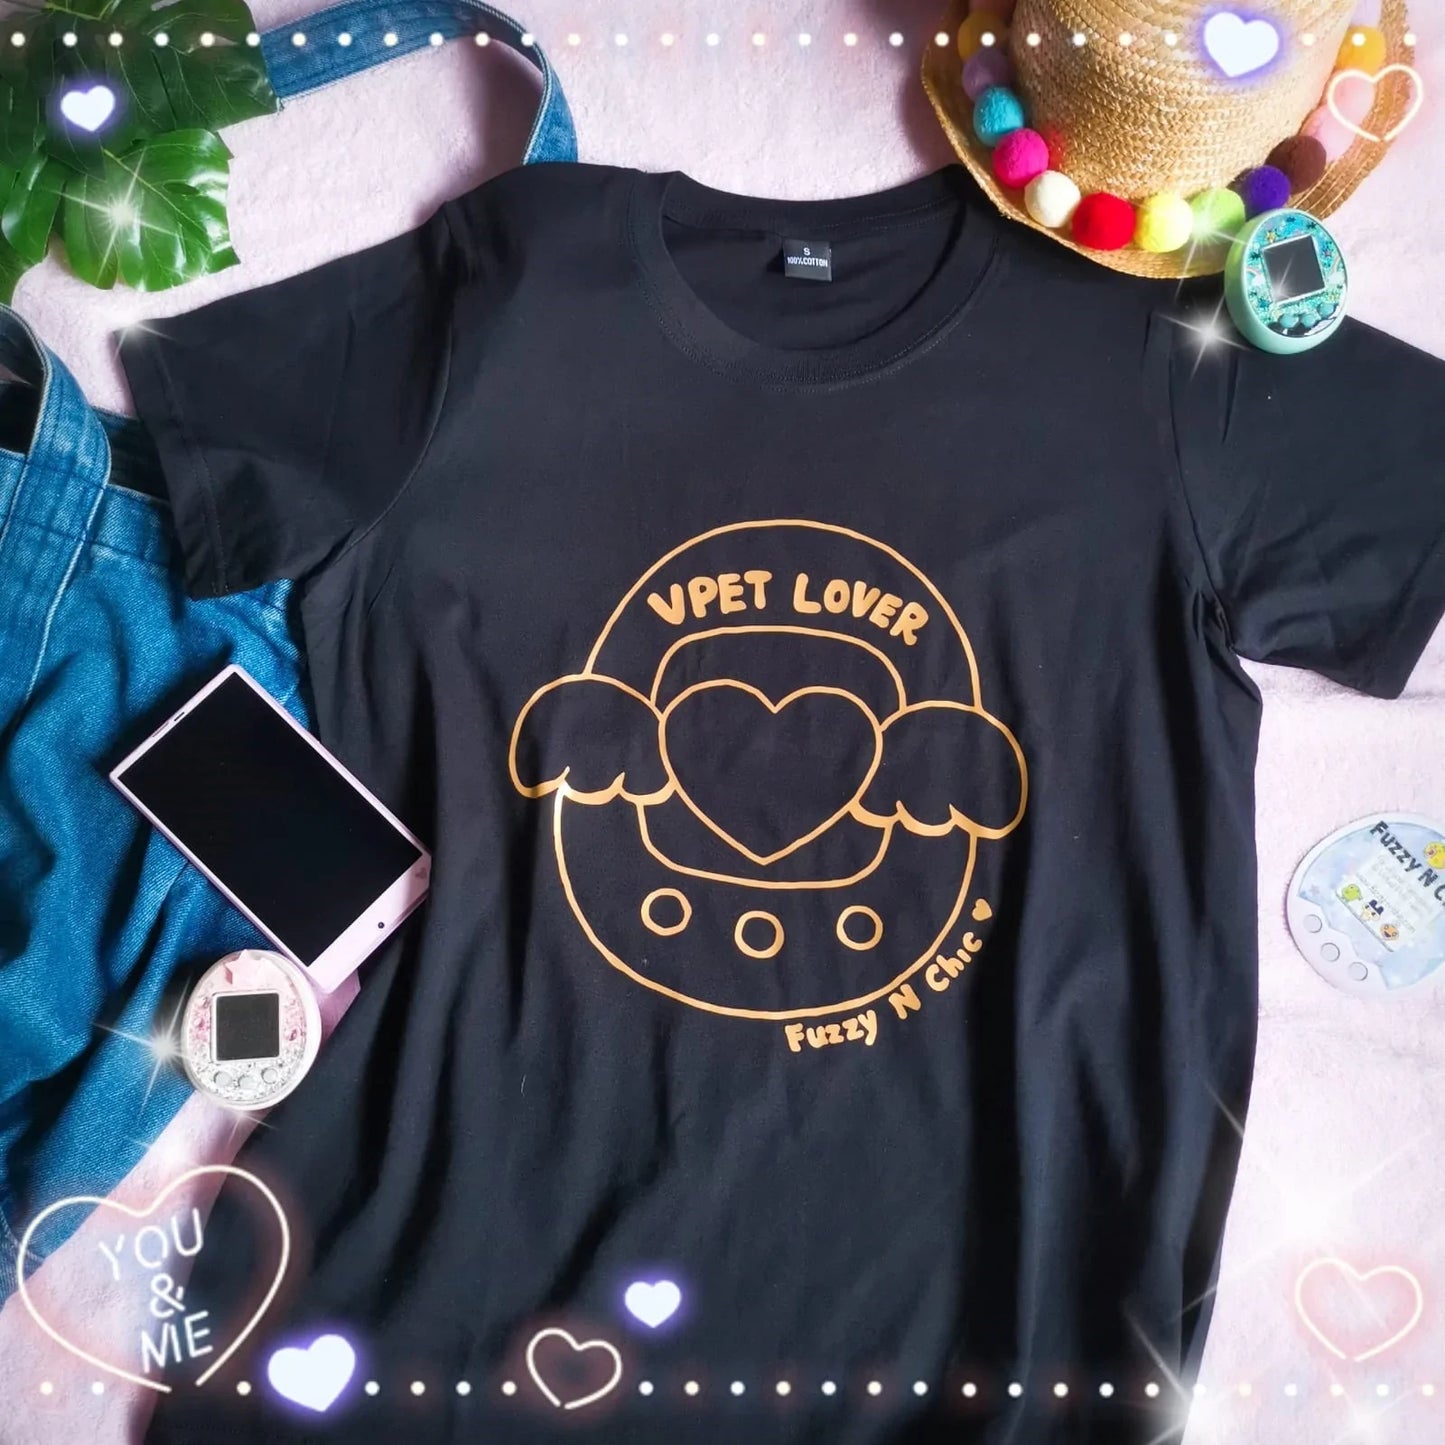 "V-Pet Lover" Gold on Black Tee (CLEARANCE SALE!) Fuzzy N Chic